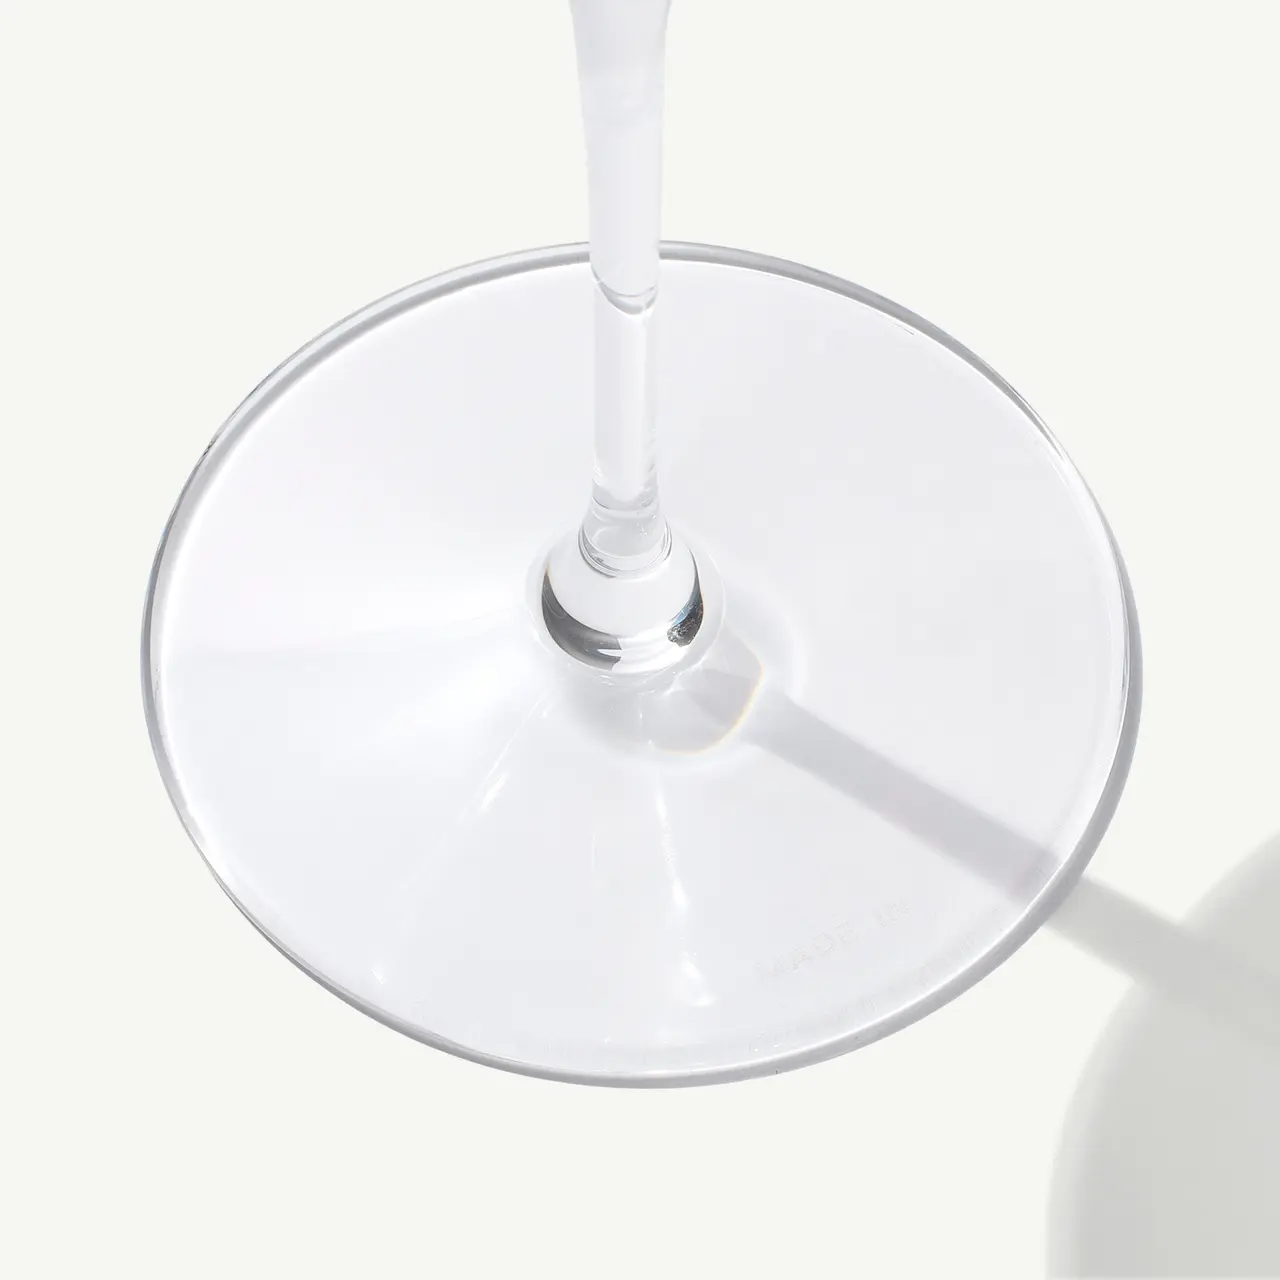 A wine glass casting a soft shadow on a plain surface under bright lighting, viewed from a top-down angle.